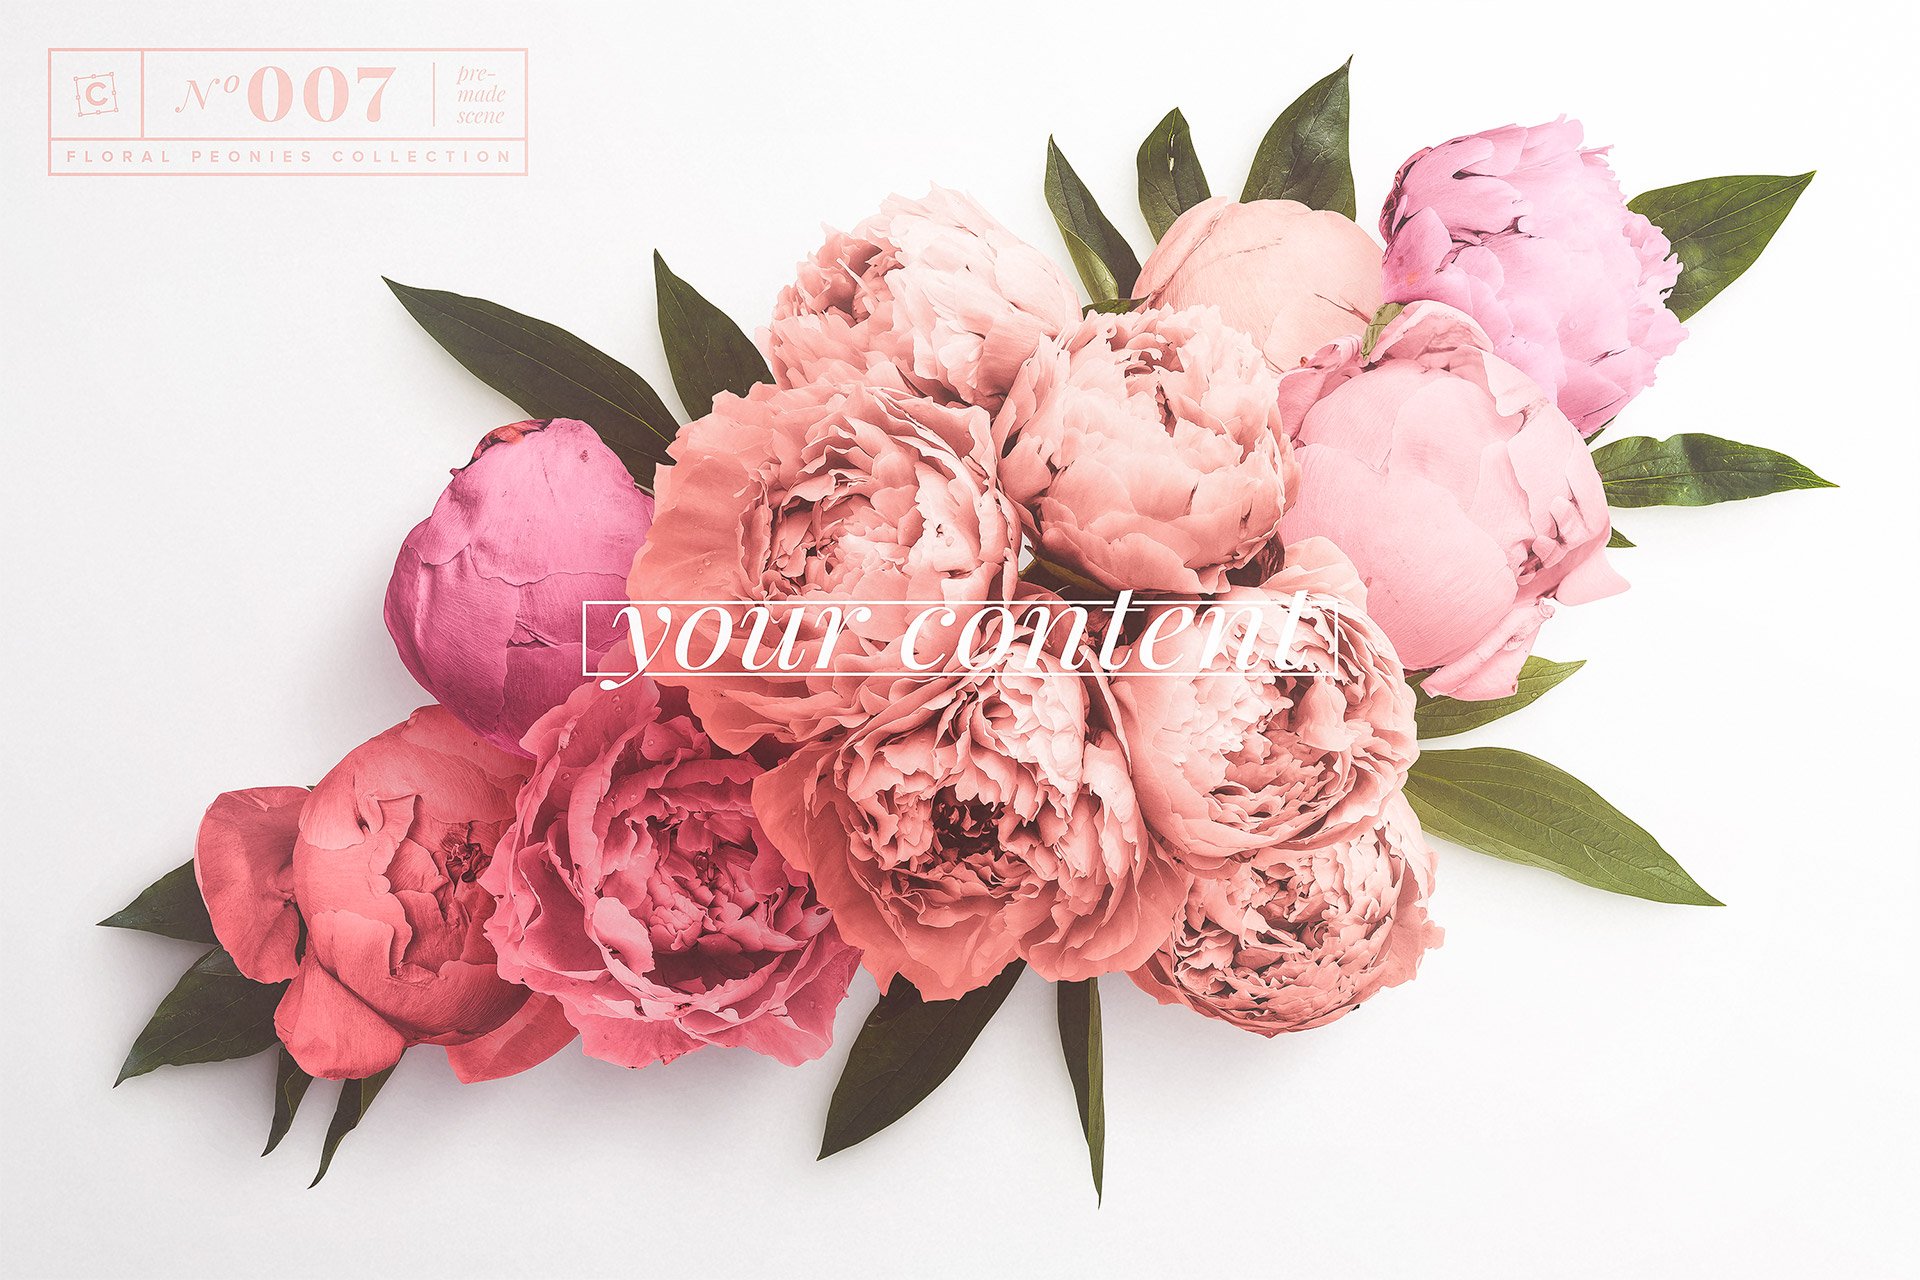 floral peonies collection scene 007 63